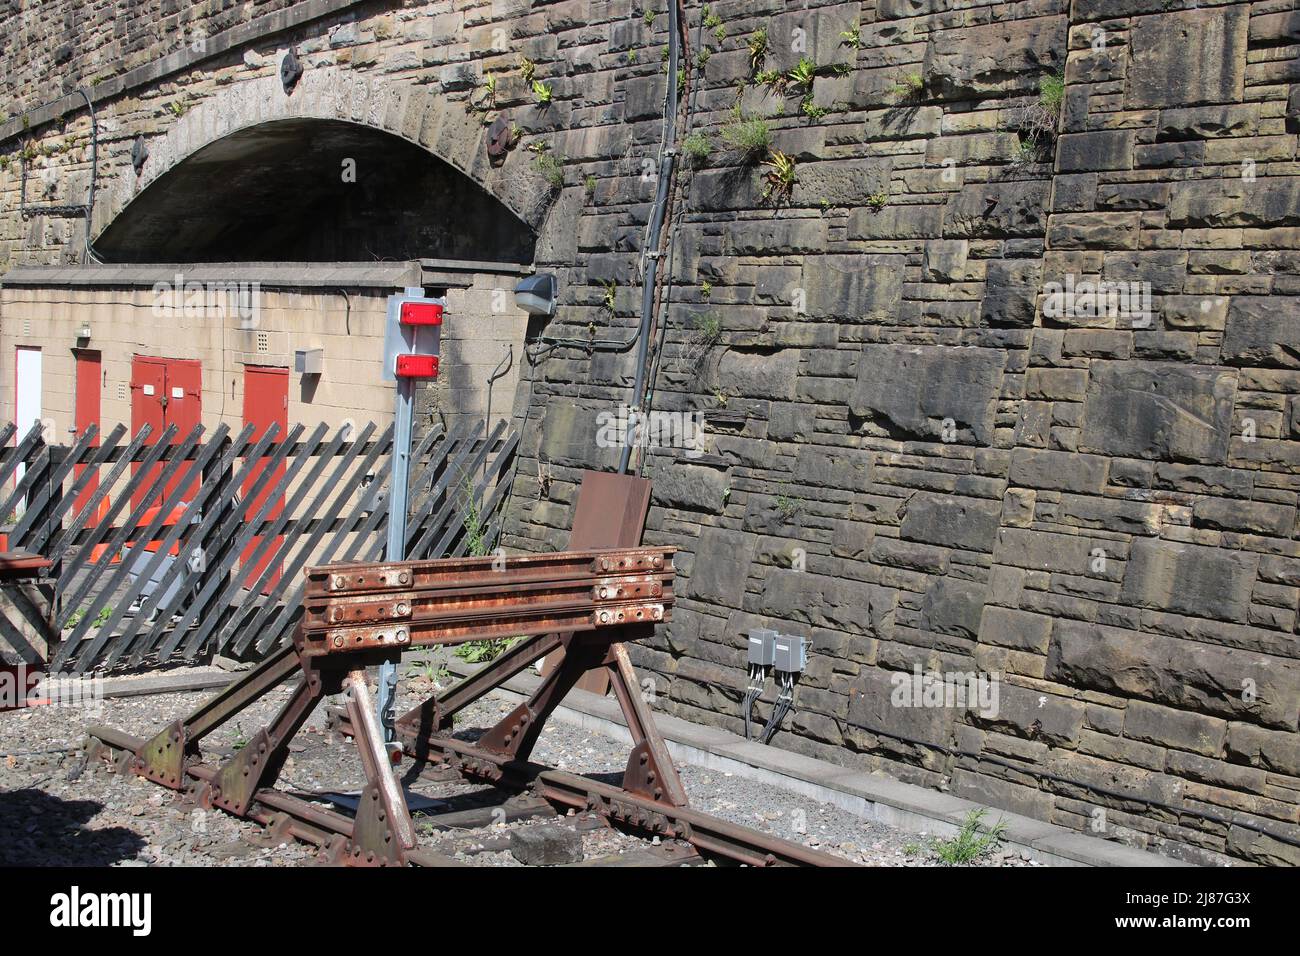 Old railway buffer stop at the end of a line at Bradford Interchange railway station with wooden sleepers in the track. Stock Photo